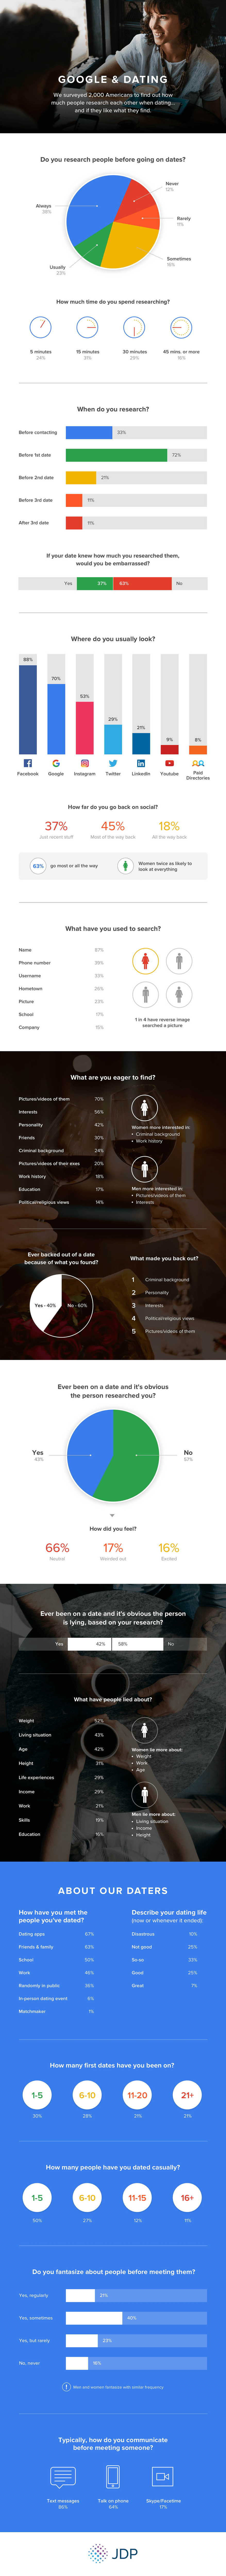 How Single Americans Research Each Other Before Dates